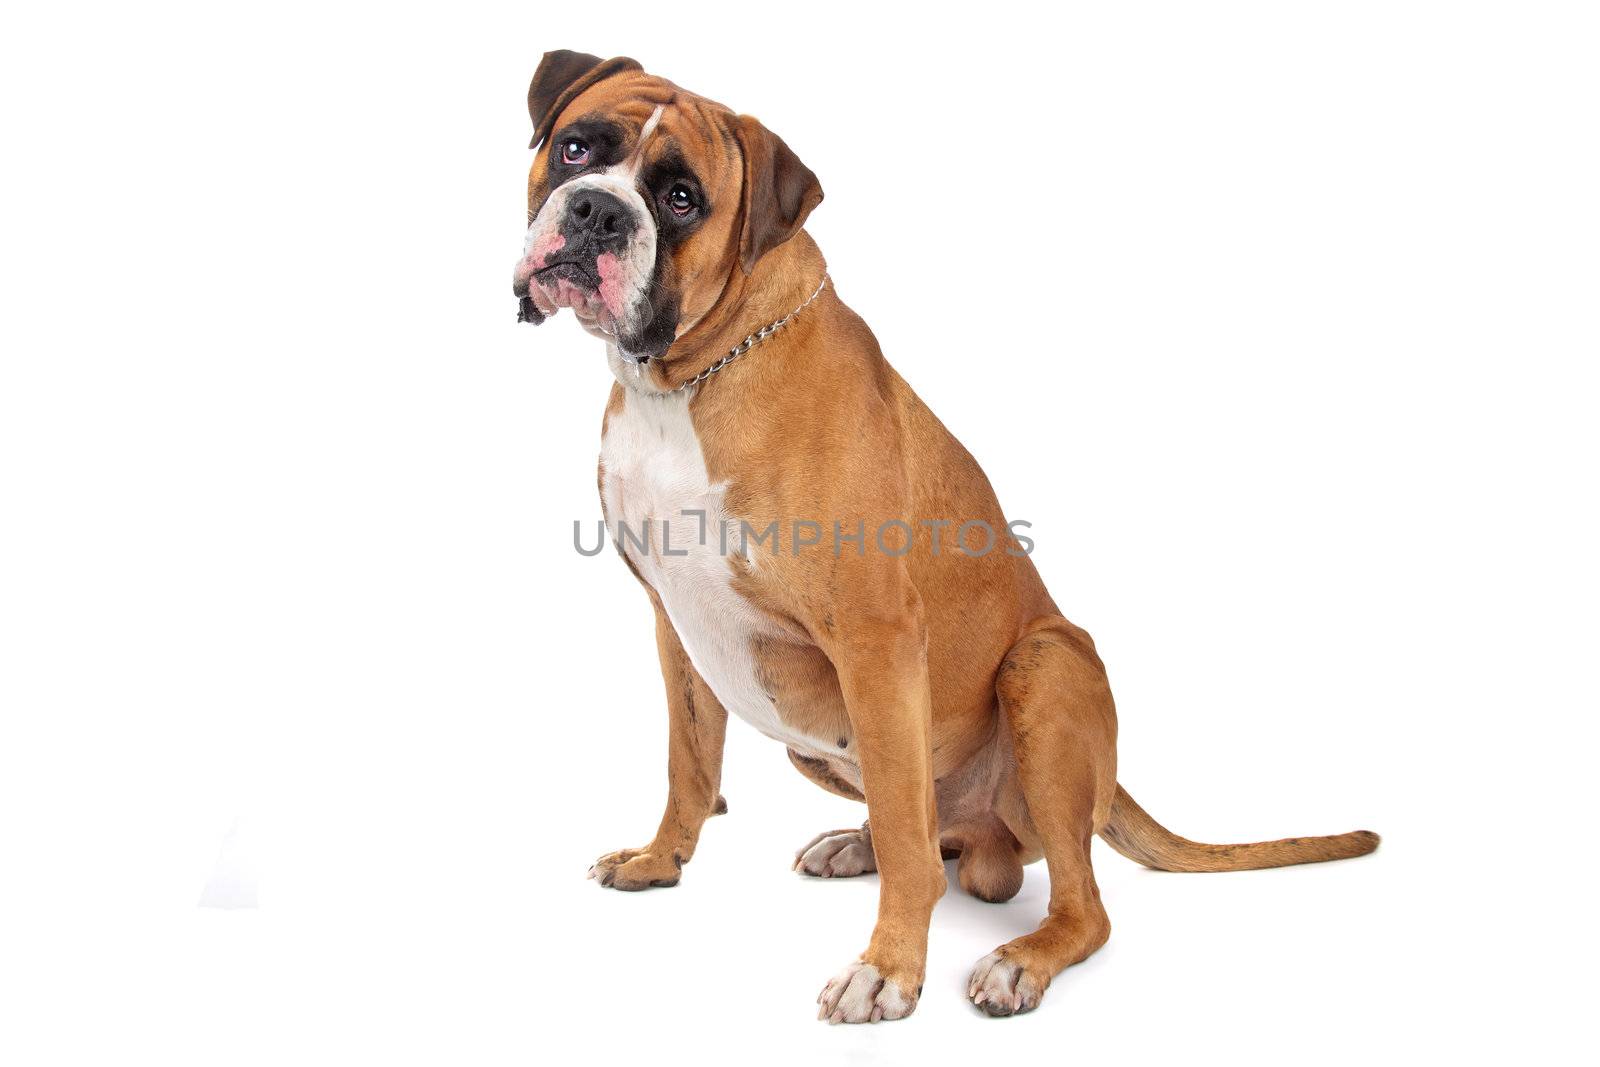 Boxer isolated on white